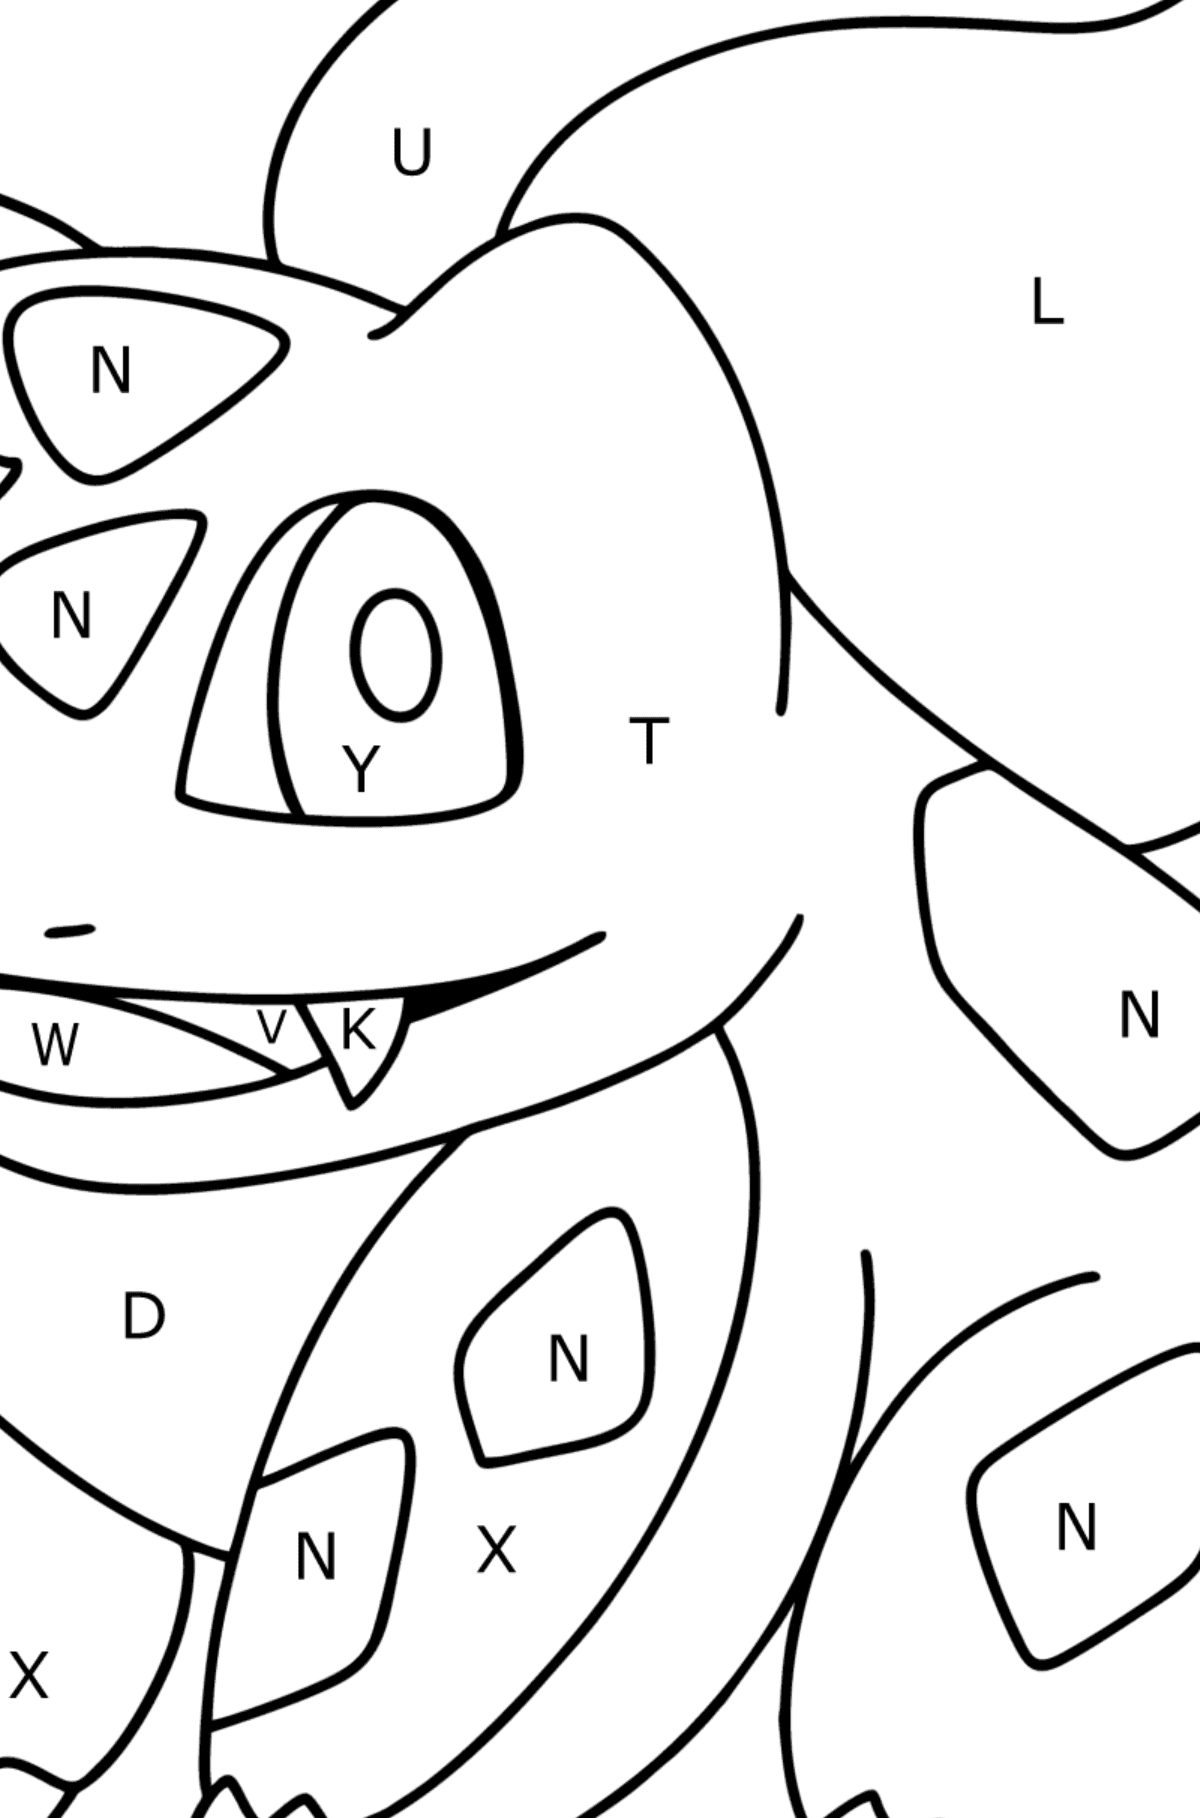 Pokémon Go Bulbasaur coloring page - Coloring by Letters for Kids